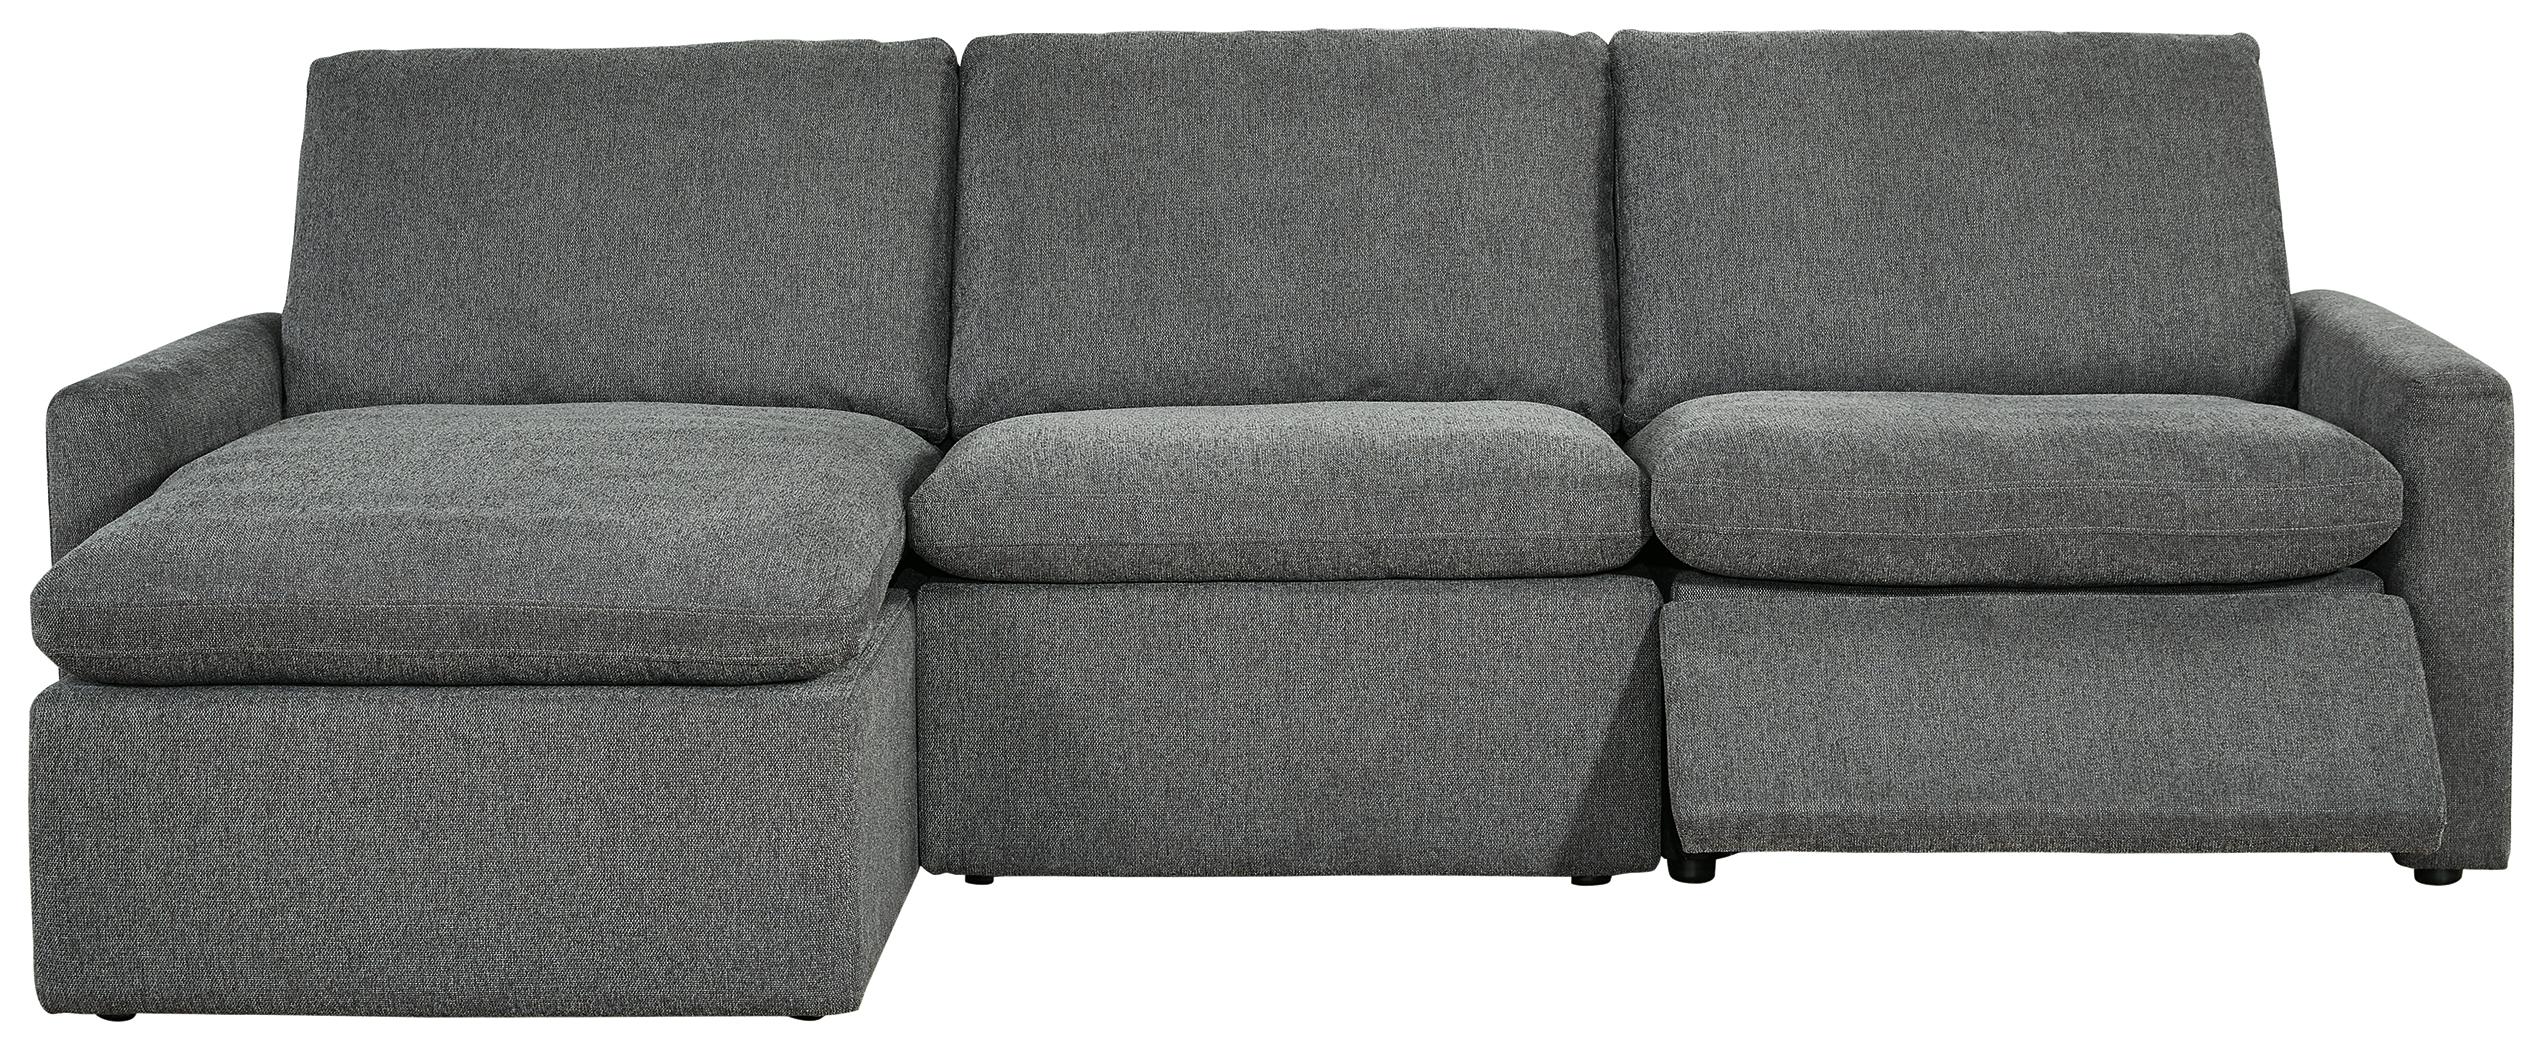 ASHLEY FURNITURE 60508S5 Hartsdale 3-piece Left Arm Facing Reclining Sofa Chaise